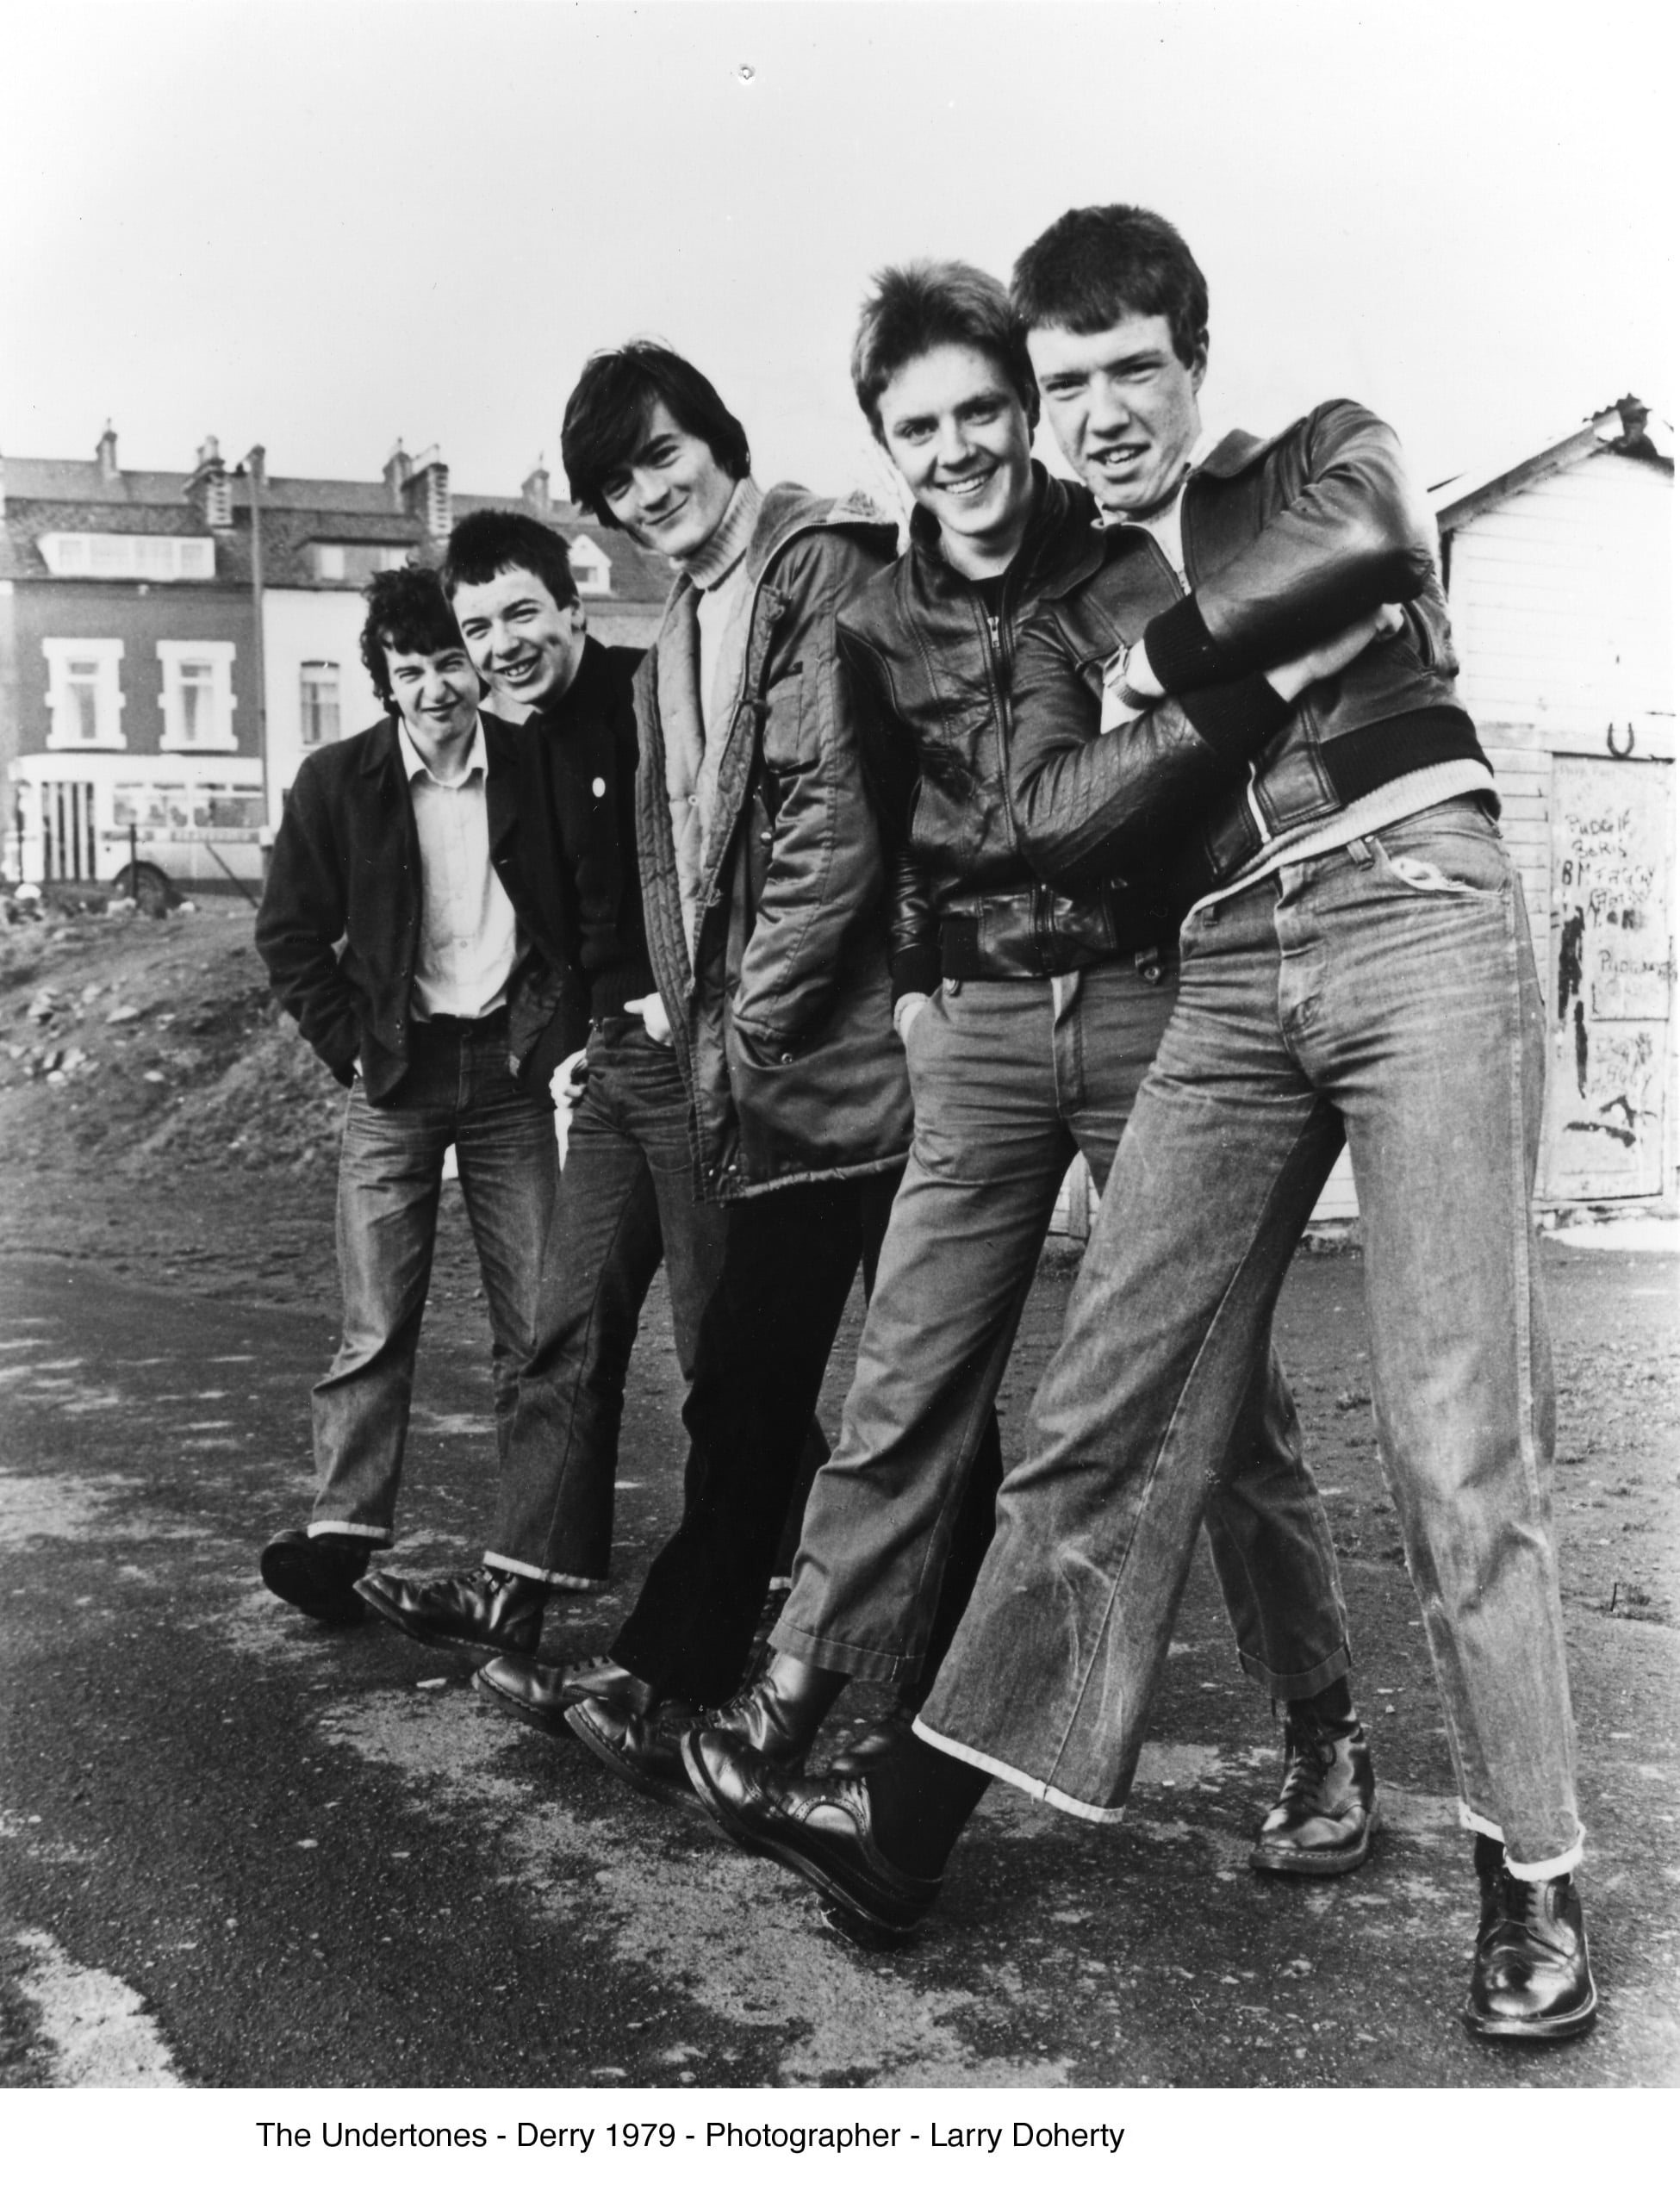 The Undertones: All Seven Inches of Them